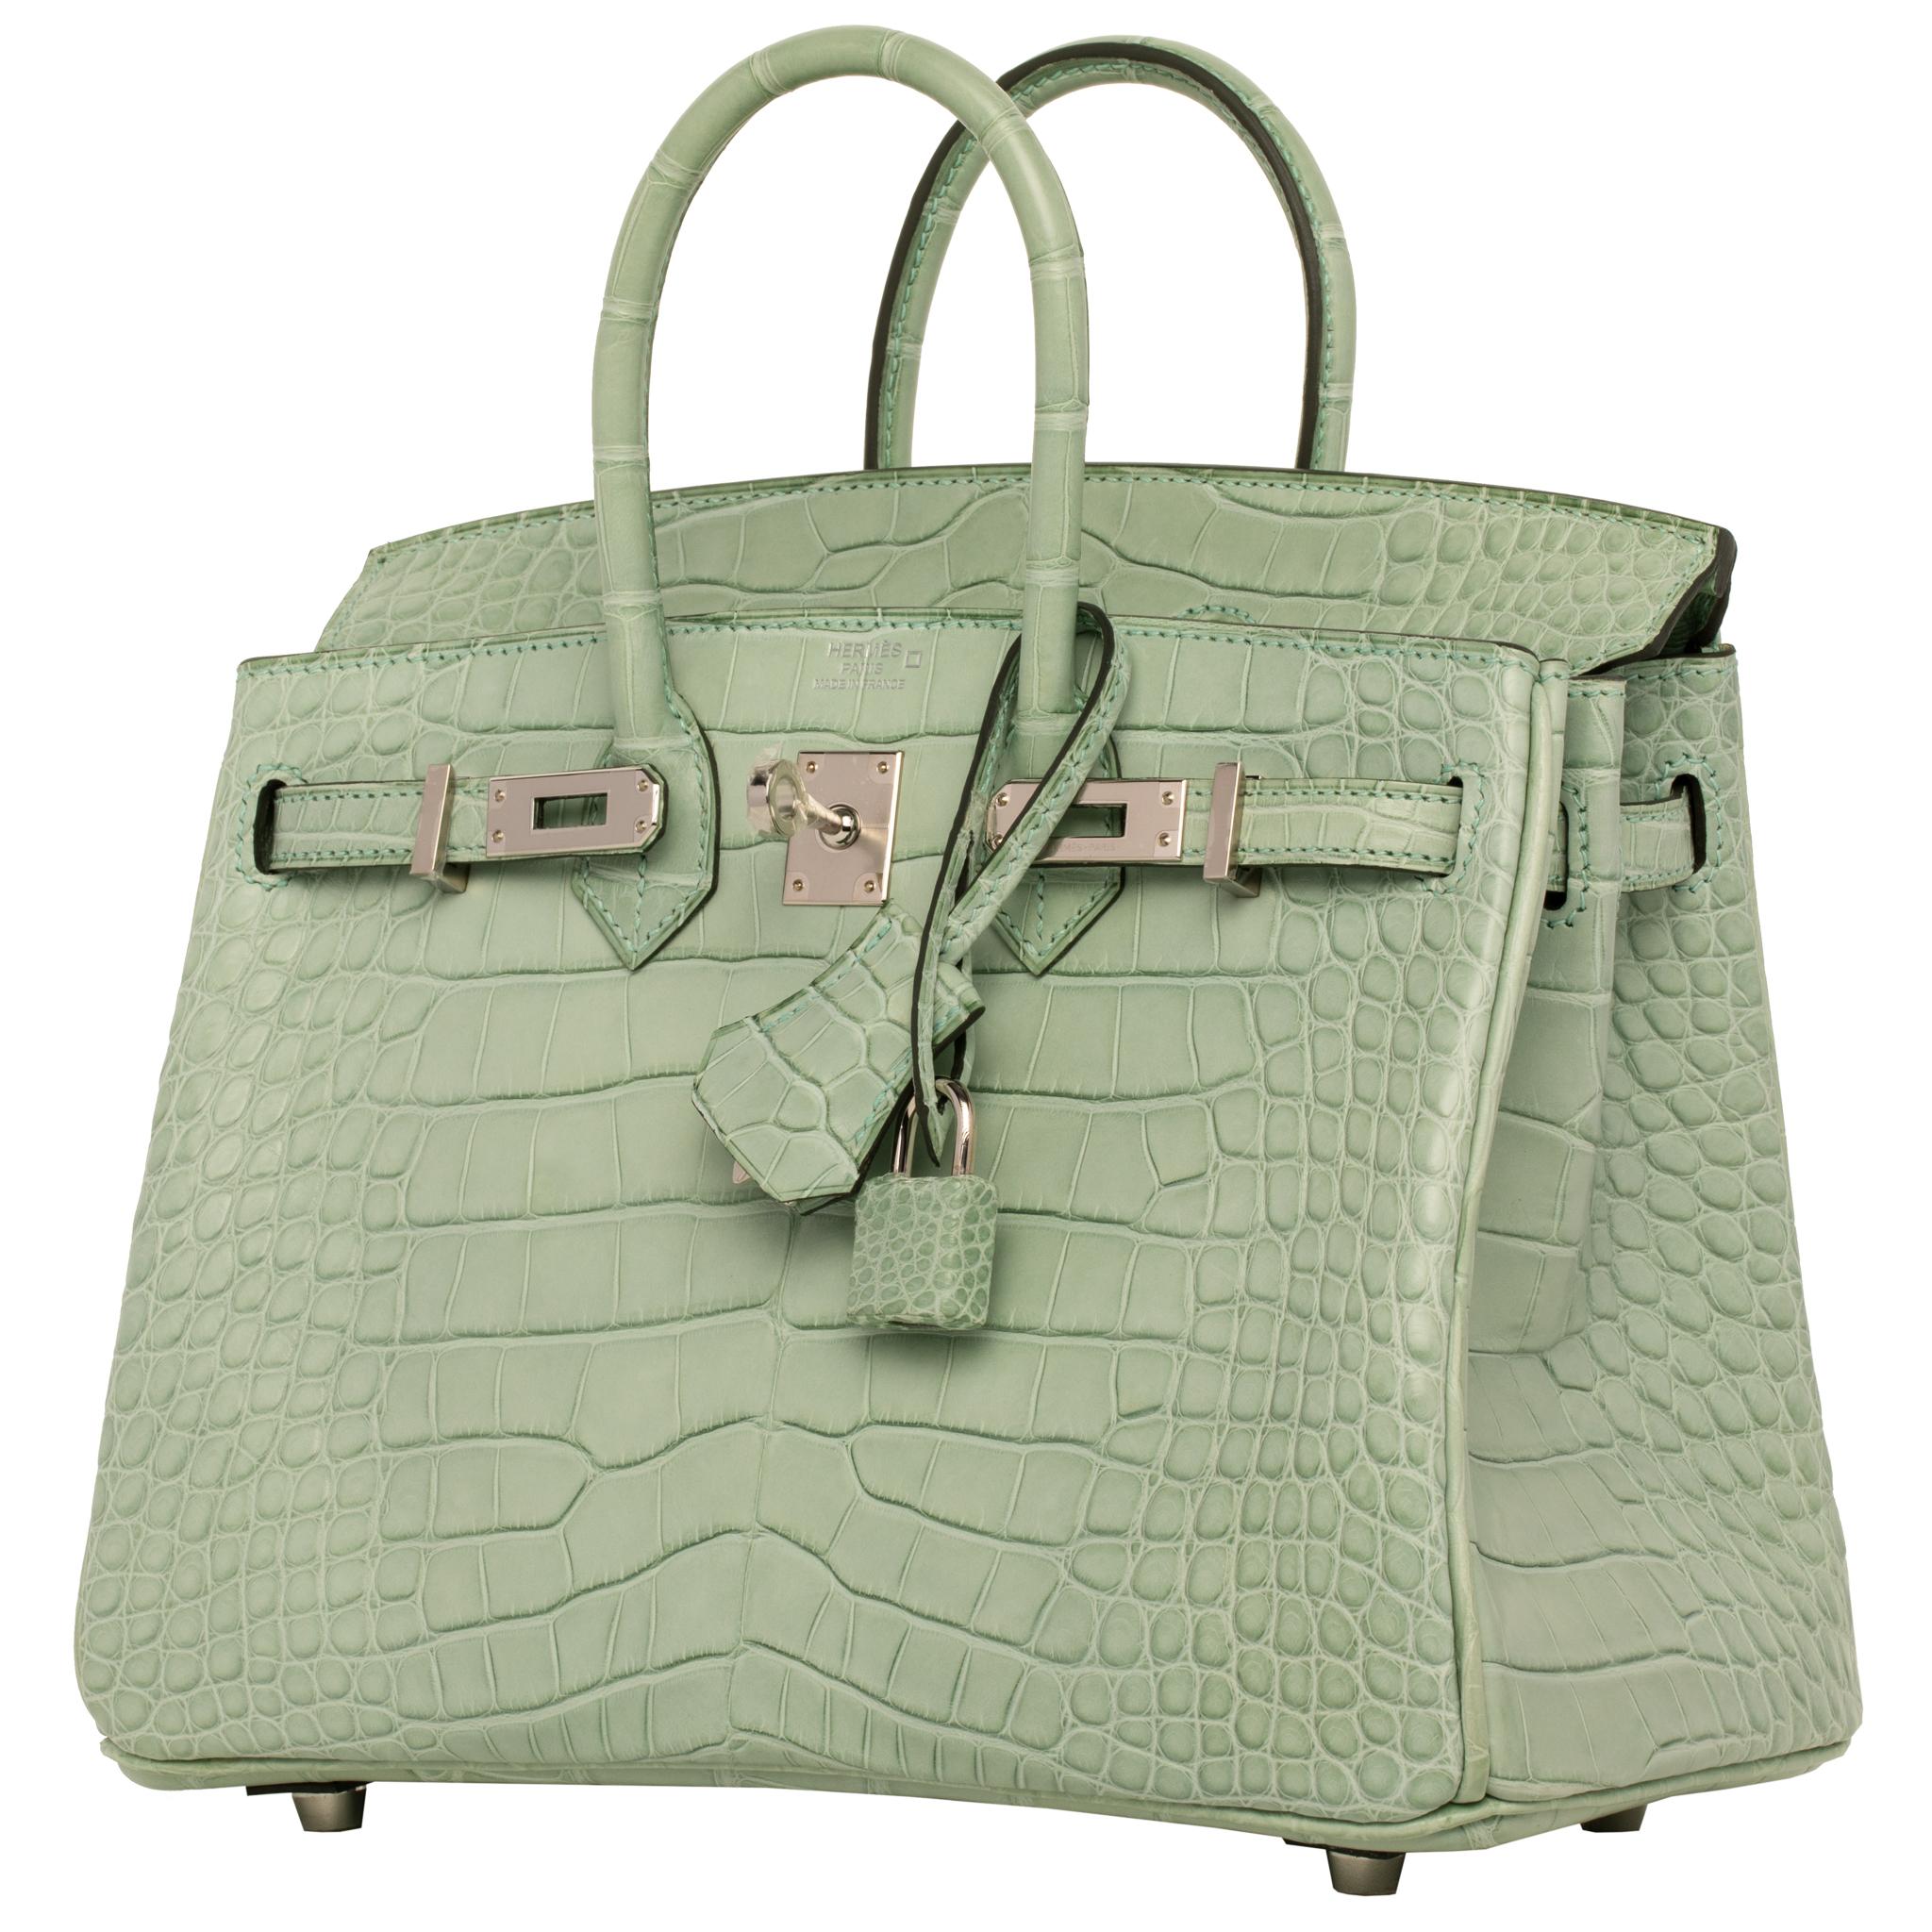 1stdibs Exclusives From Three Over Six

Brand: Hermès 
Style: Birkin
Size: 25cm 
Color: Vert D Eau
Leather: Matte Alligator
Hardware: Palladium
Stamp: 2020 D

Condition: Pristine, never carried: The item has never been carried and is in pristine